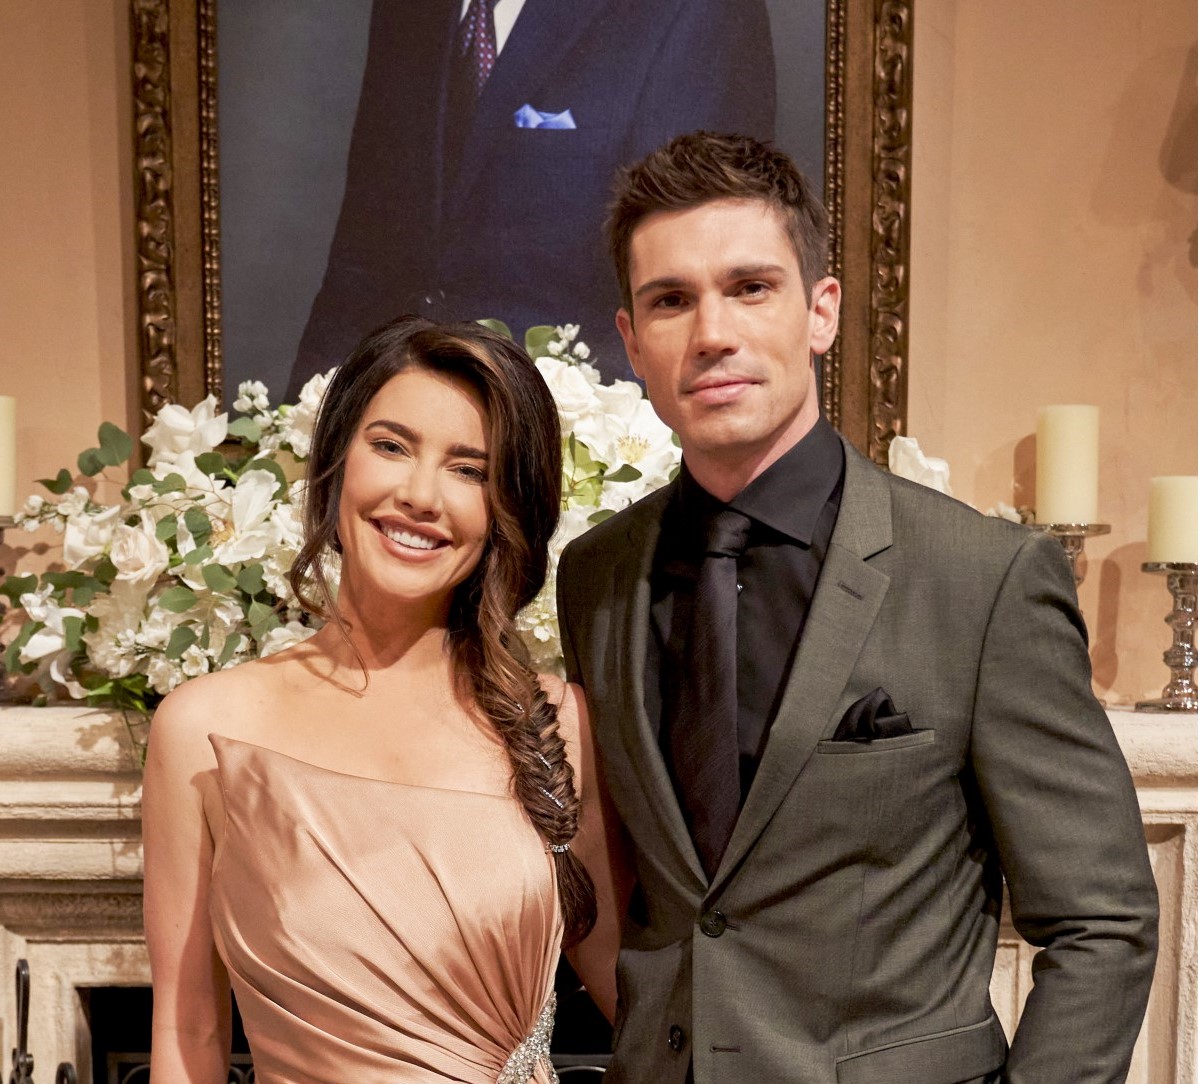 'The Bold and the Beautiful' star Jacqueline MacInnes Wood in a champagne colored dress and Tanner Novlan in a grey suit; pose together in the Forrester living room.